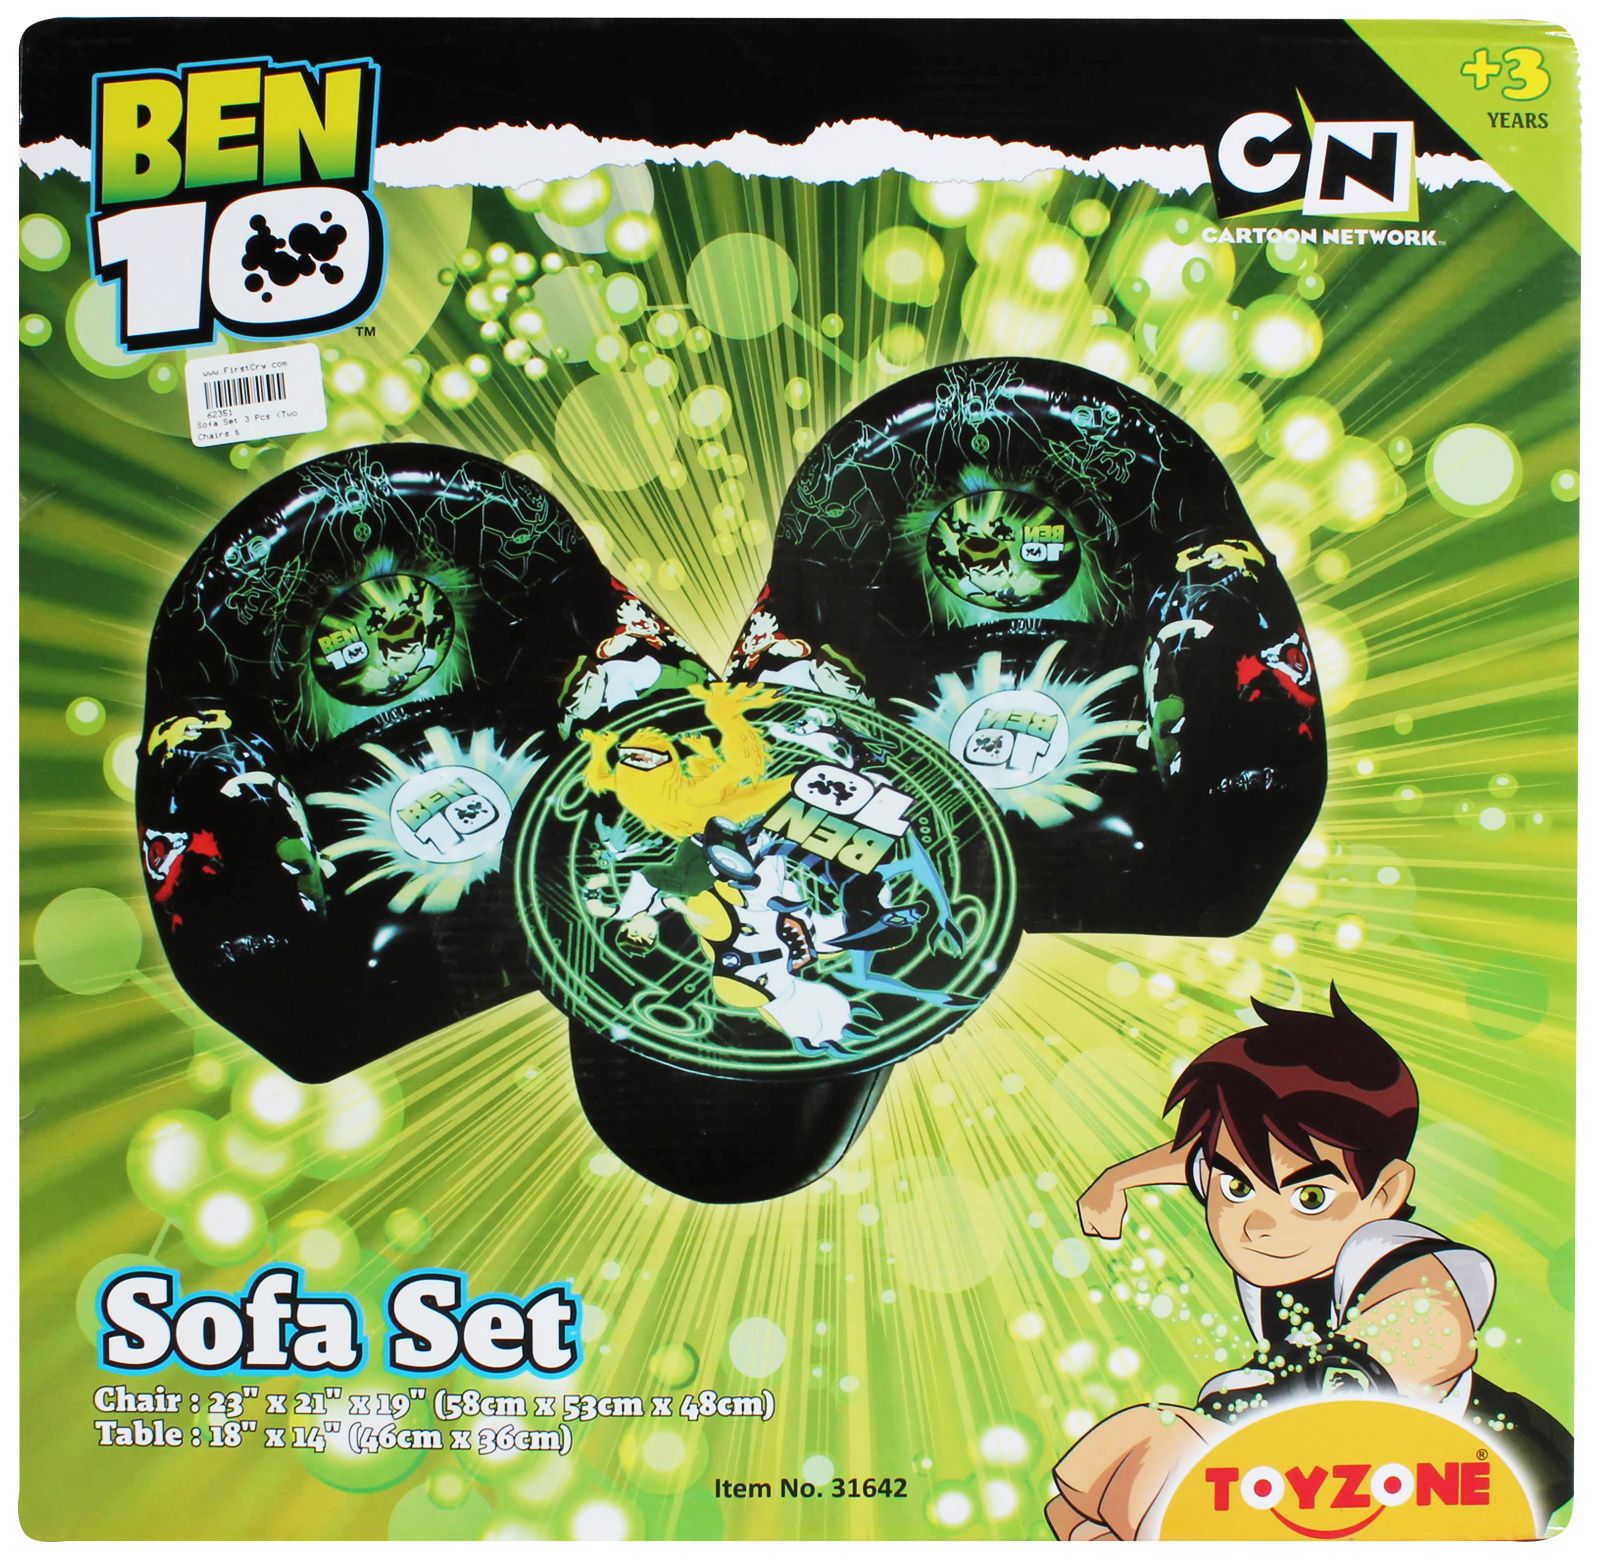 Ben 10 Sofa Set With Chair & Table